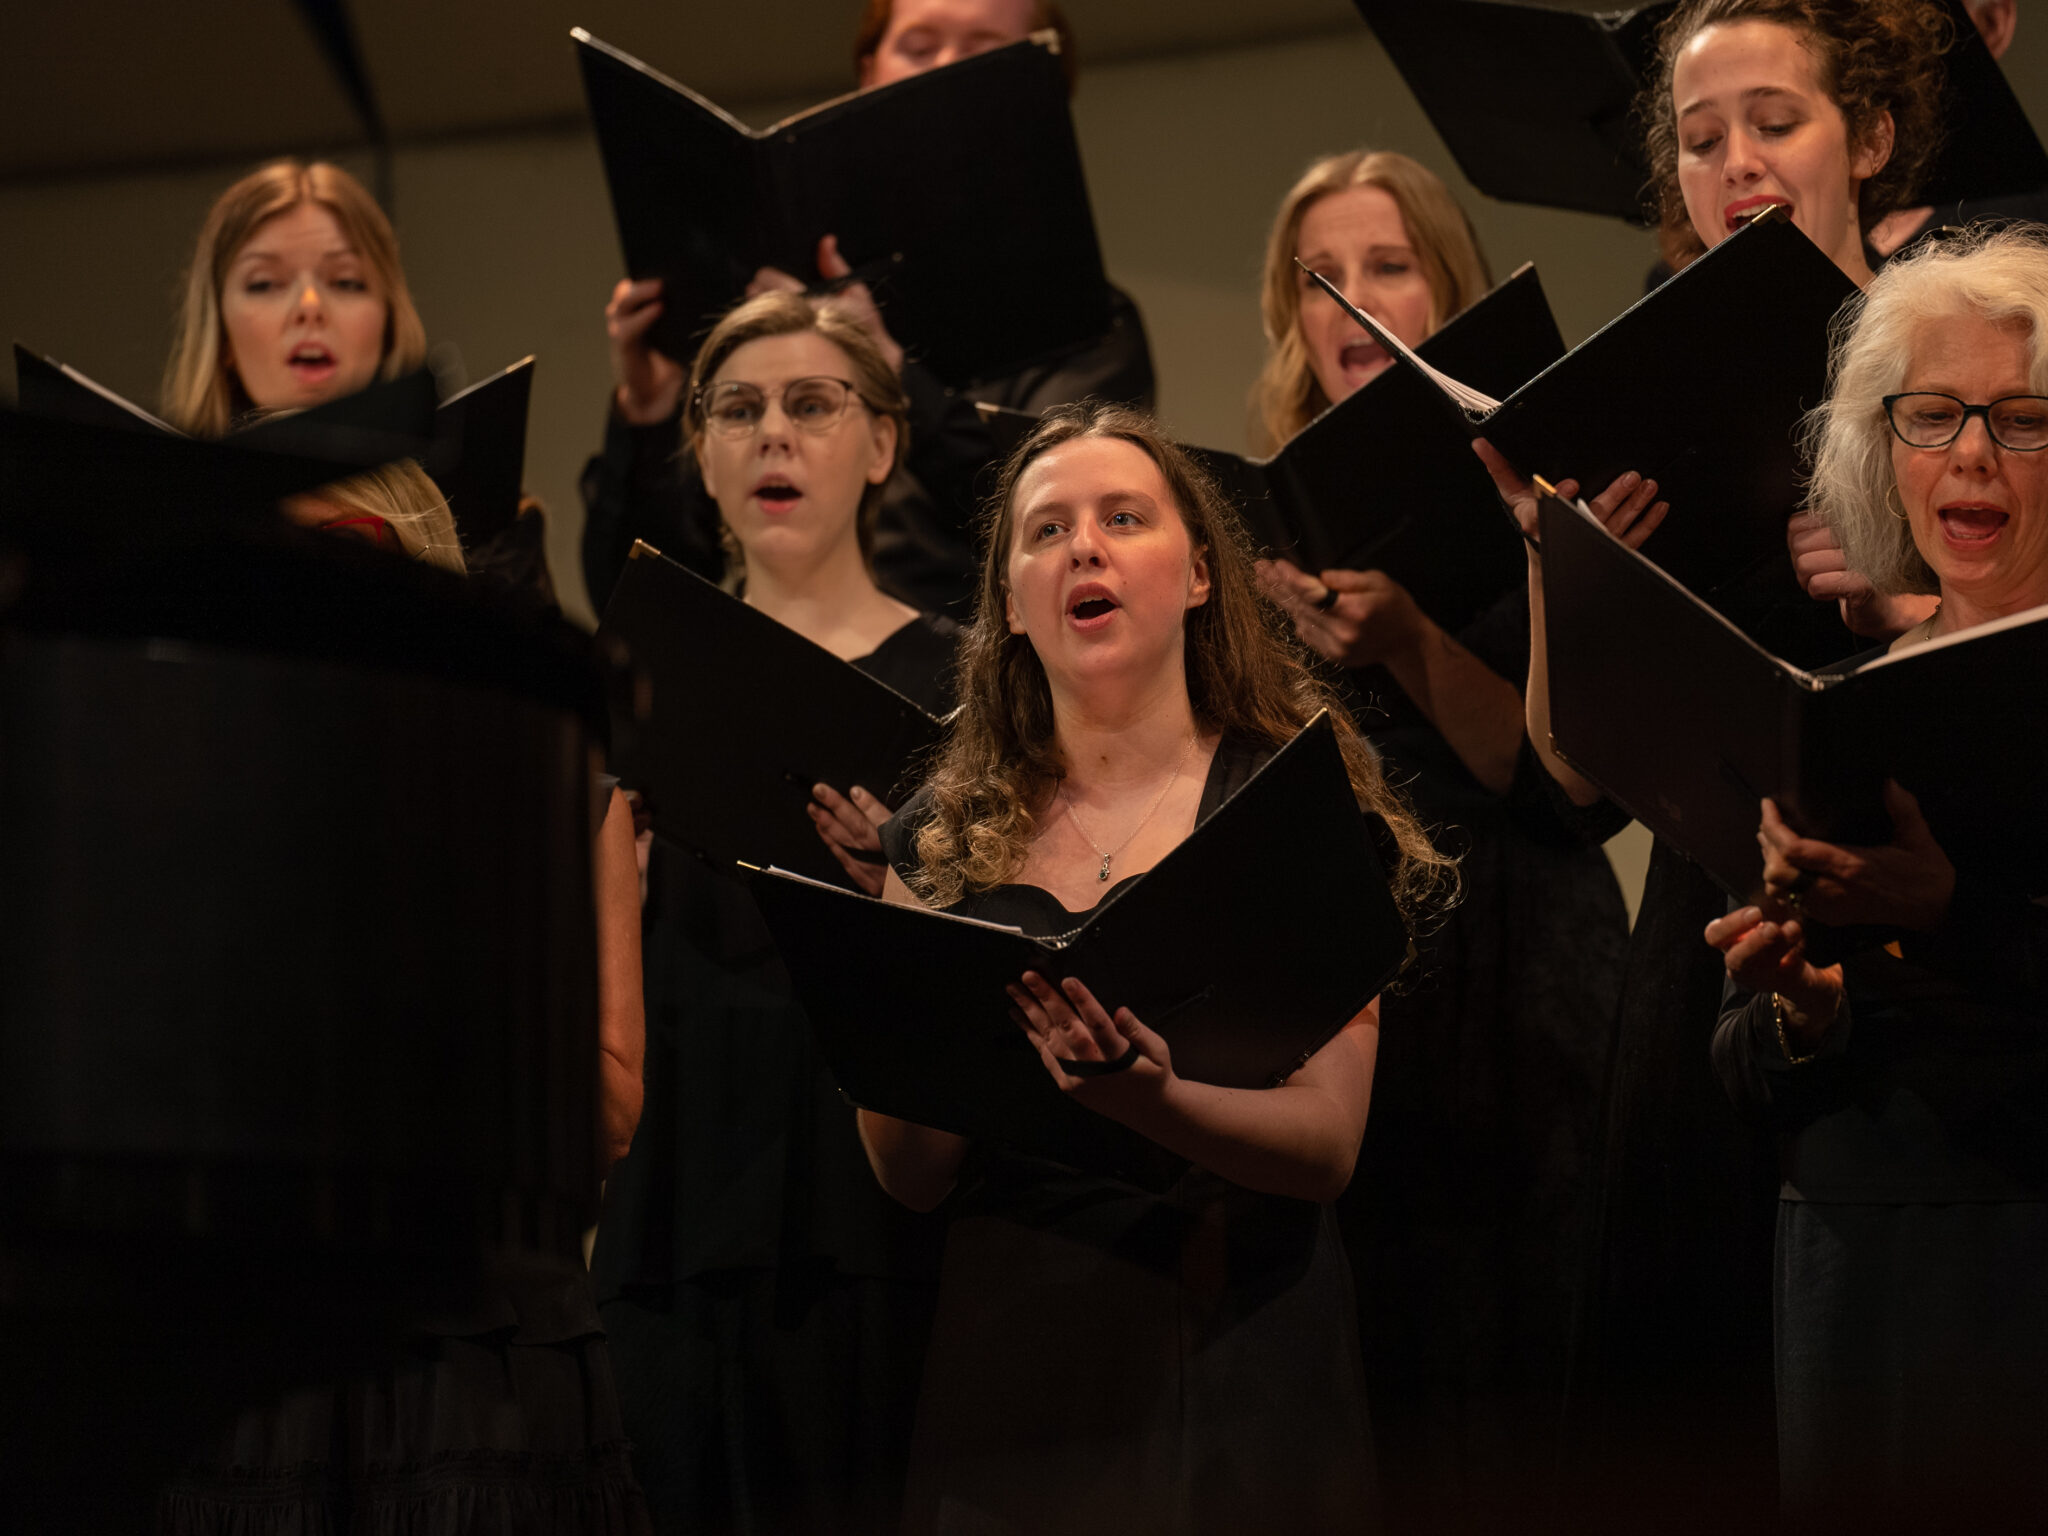 The Cardinal Chorale performs in NIC's Spring Celebrations concert on May 2 at Boswell Hall Schuler Performing Arts Center on NIC's Coeur d'Alene Campus.